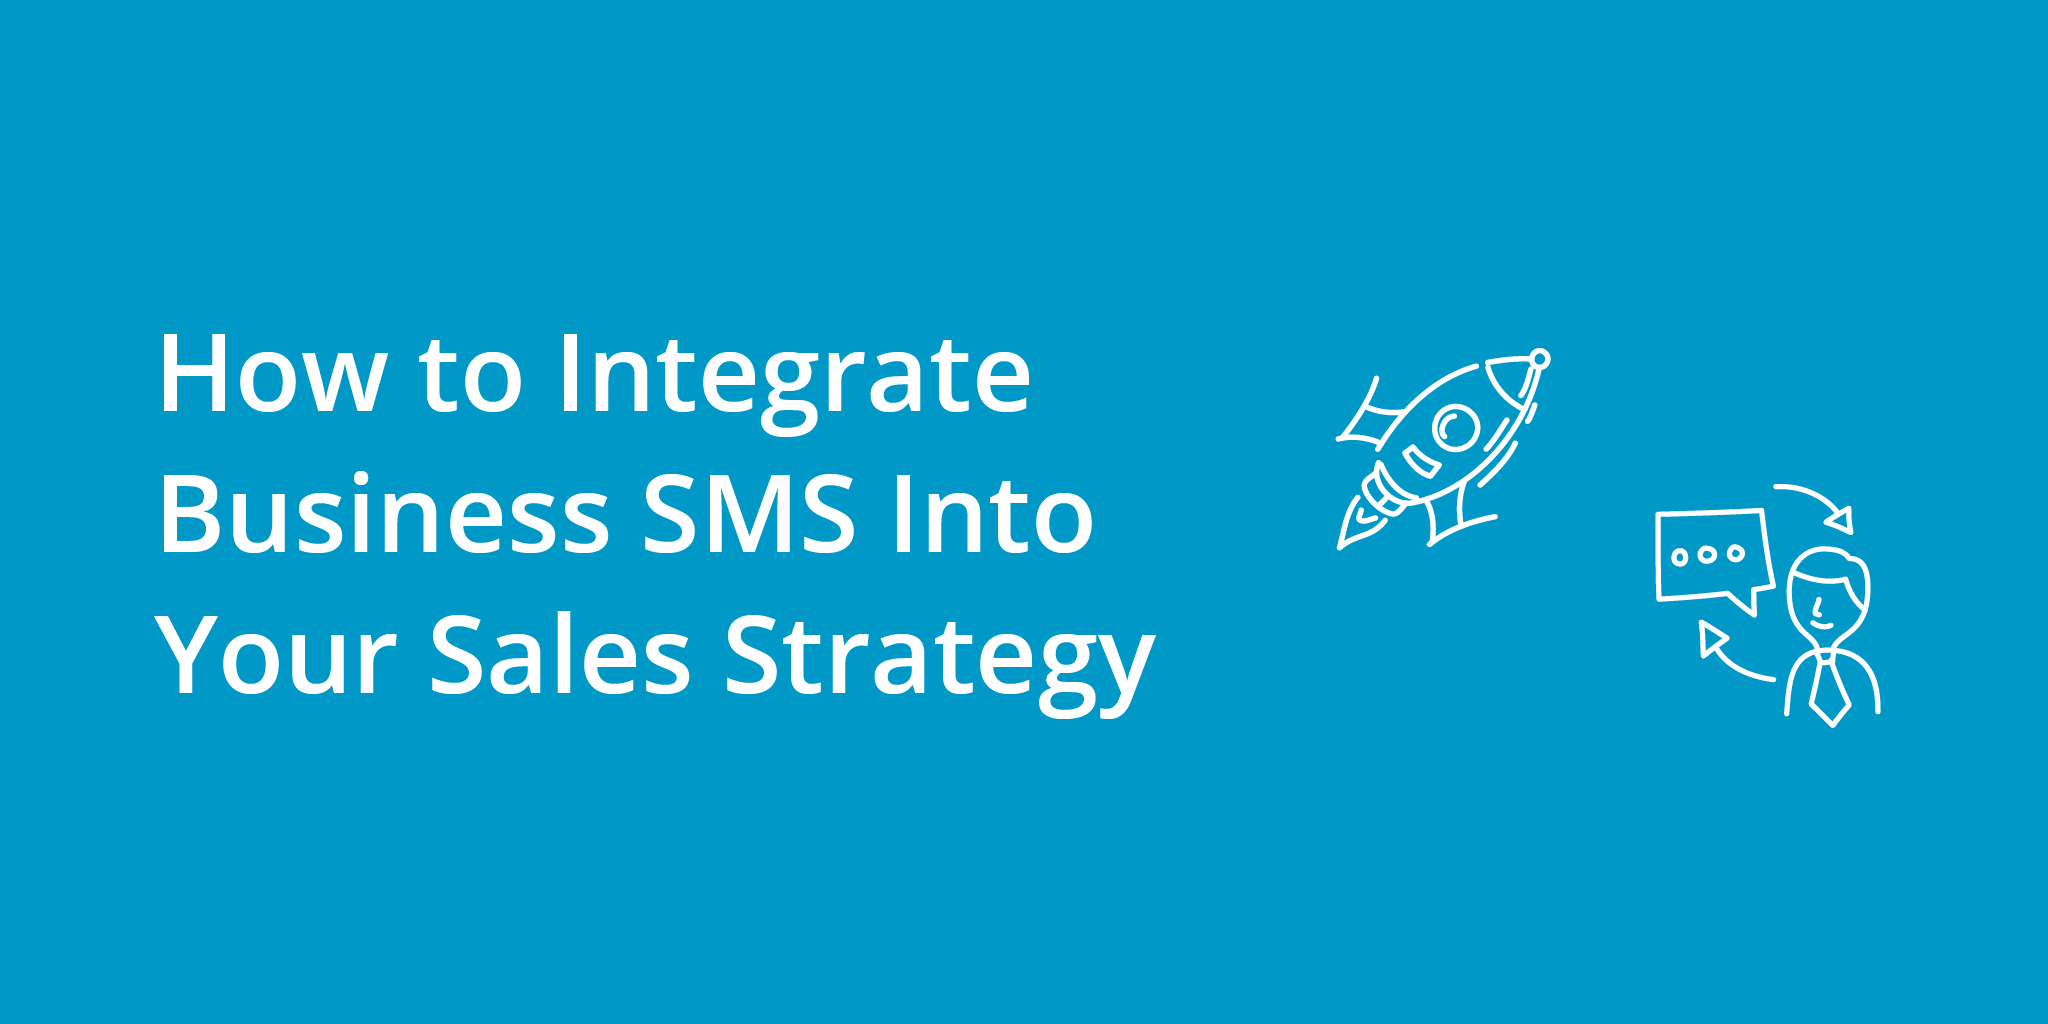 How to Integrate Business SMS into Your Sales Strategy